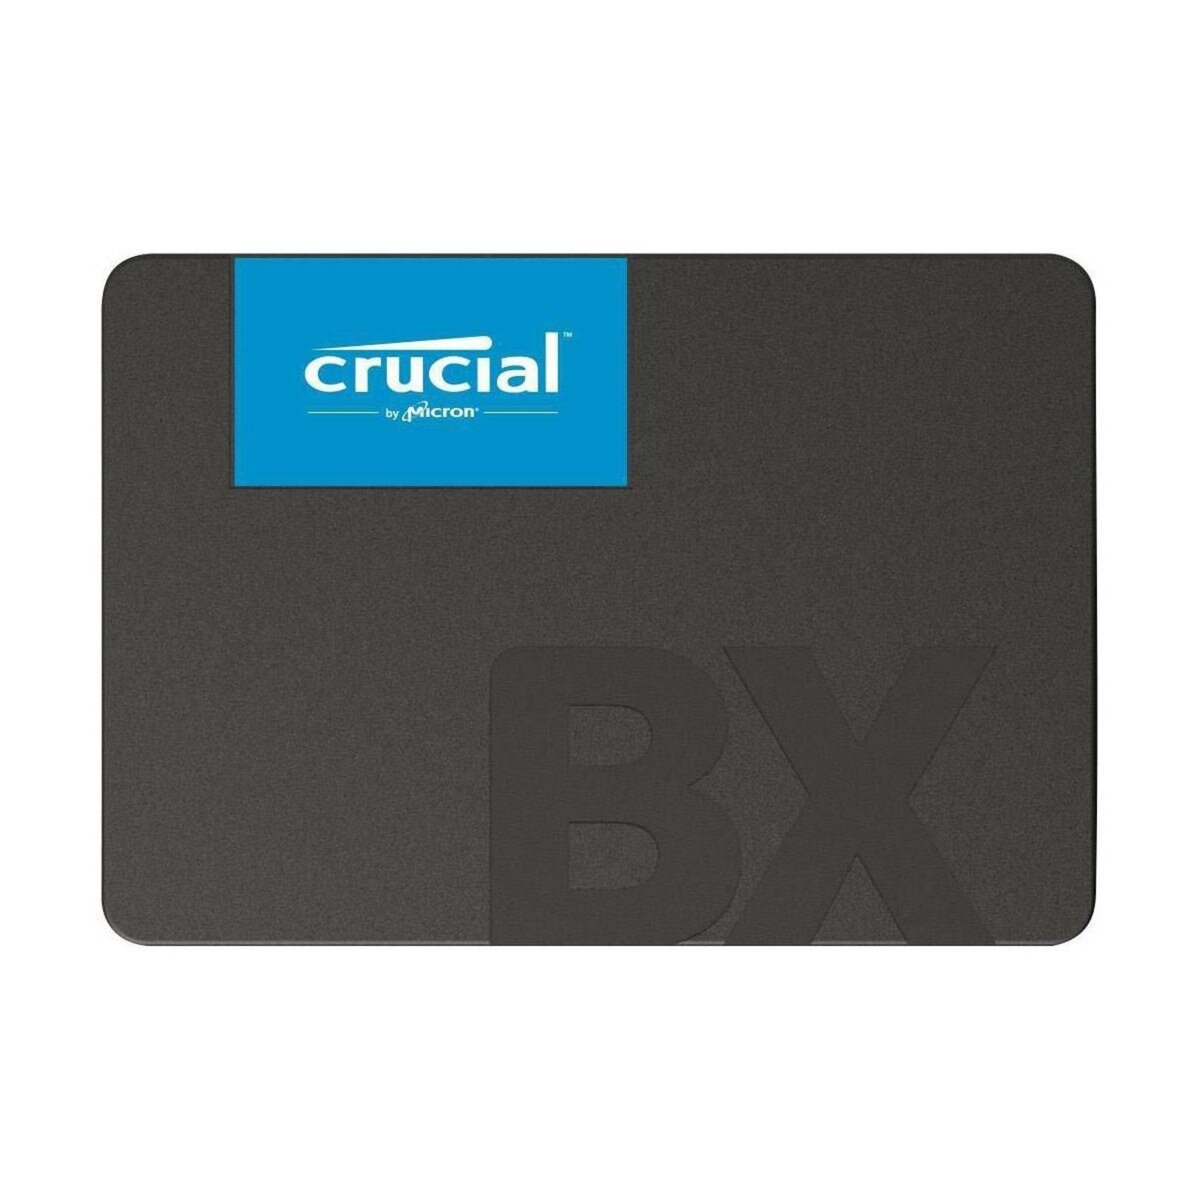 Crucial Disque dur SSD interne 1To BX500